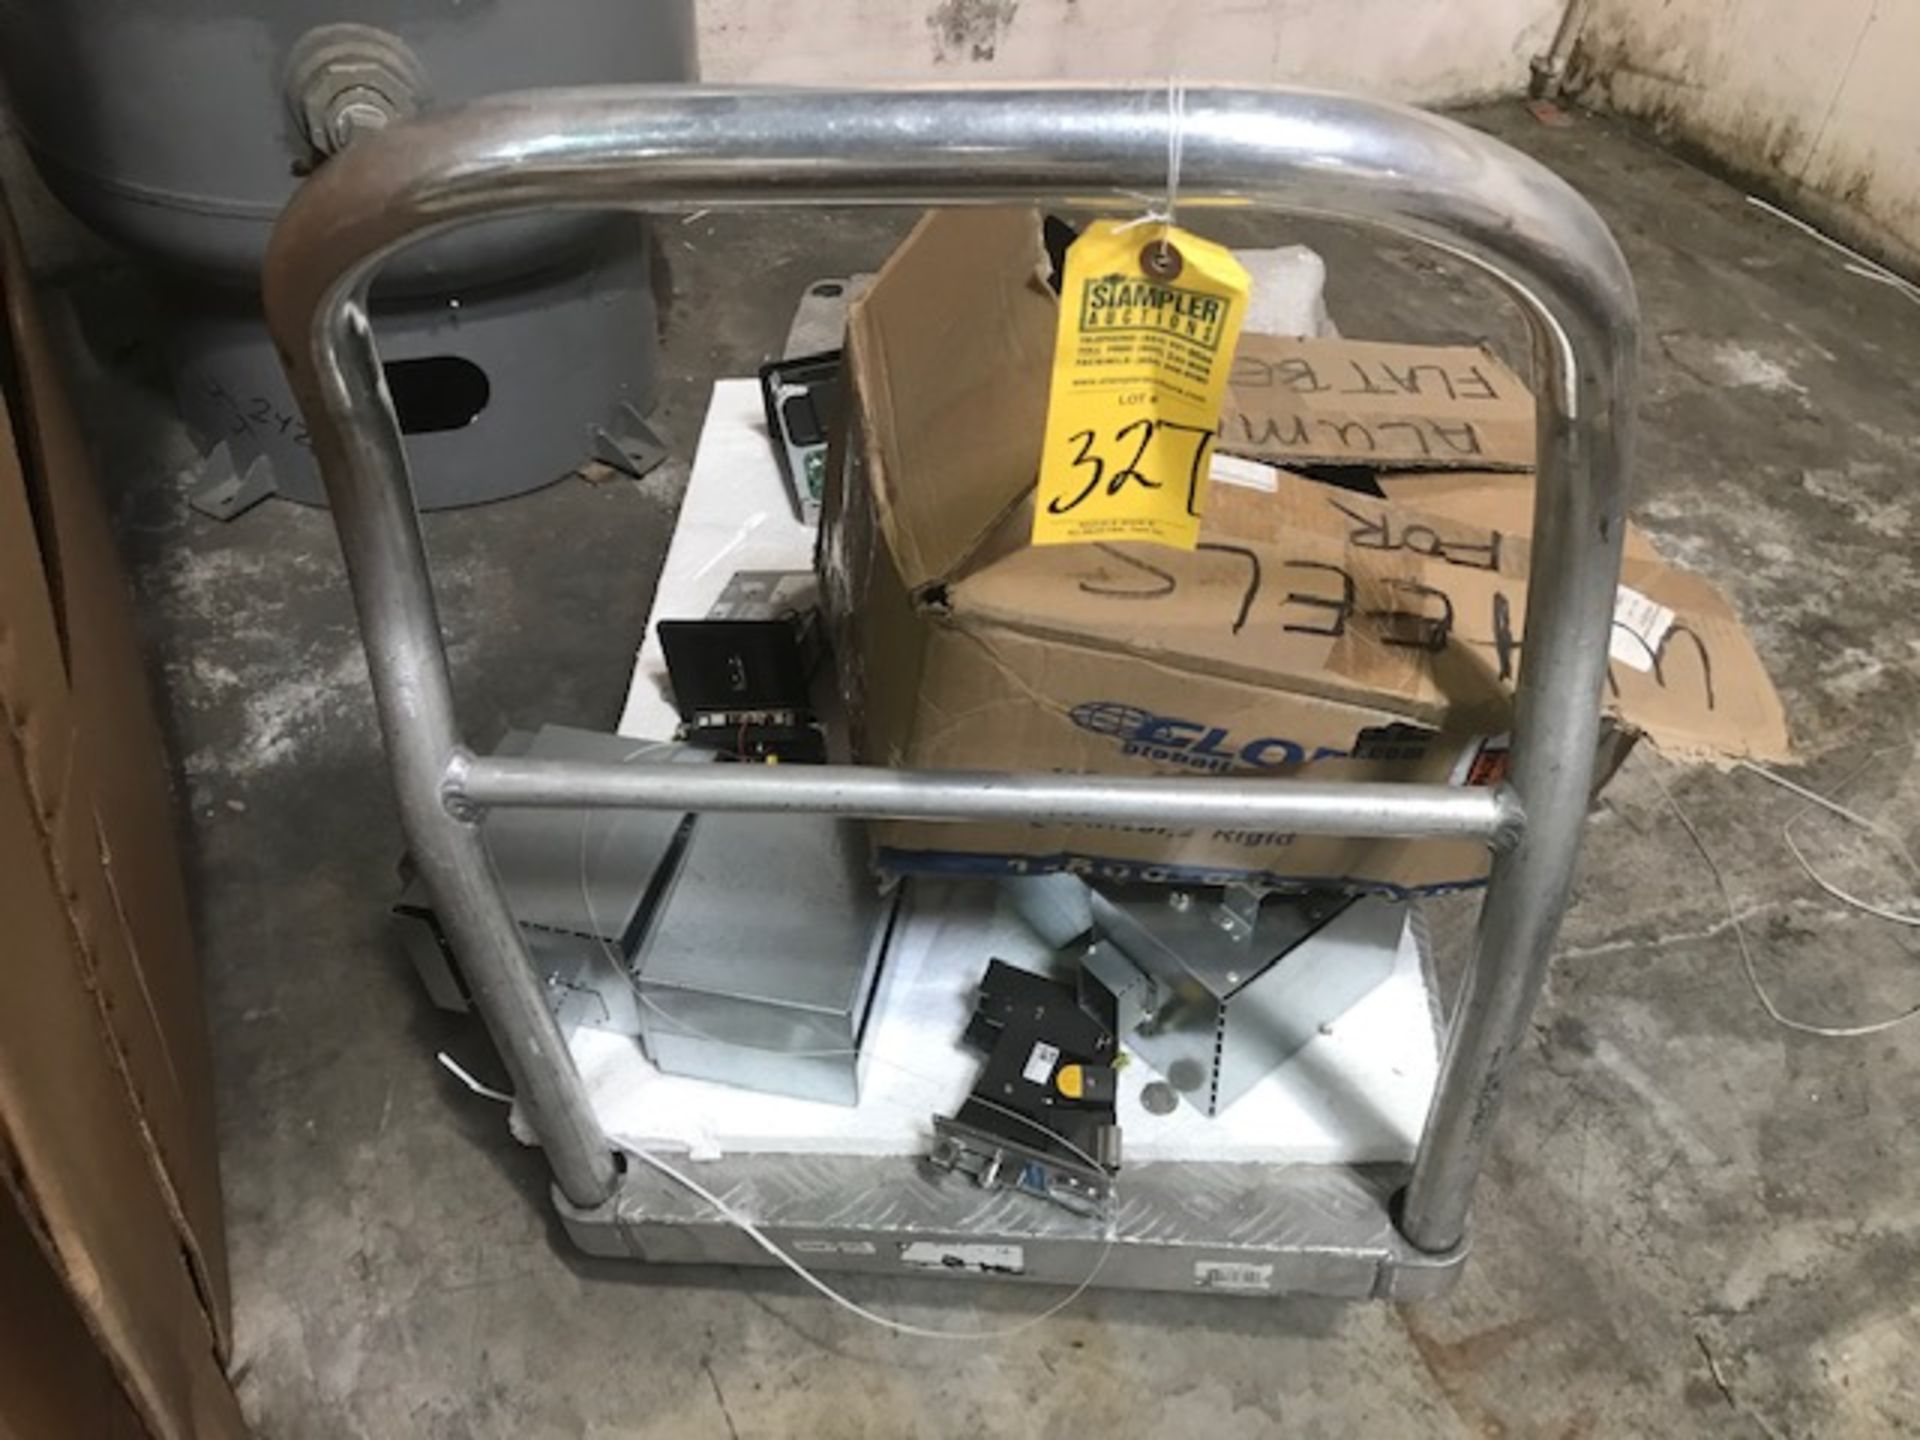 ROLLING CART WITH CONTENTS - COIN ACCEPTORS, ETC